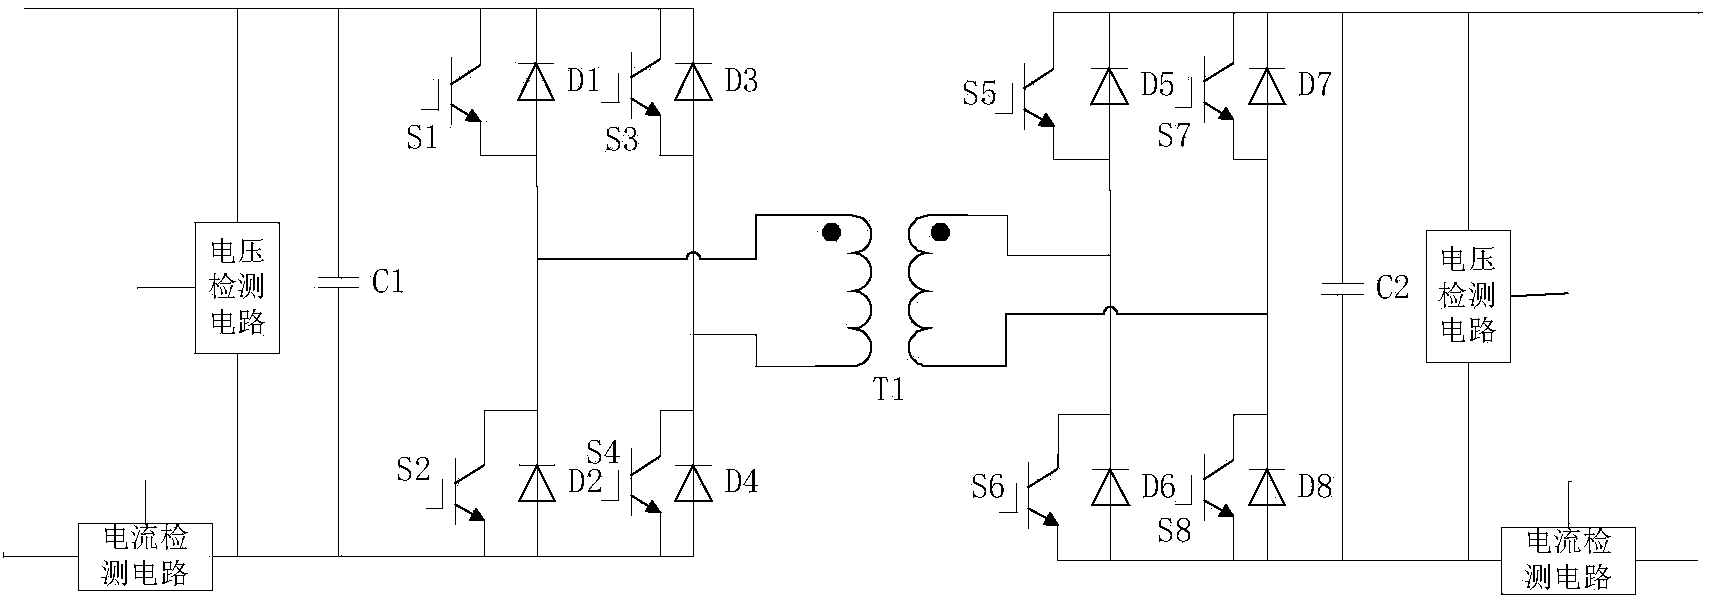 Integrated structure of servo driver and backup power supply for pitch control system